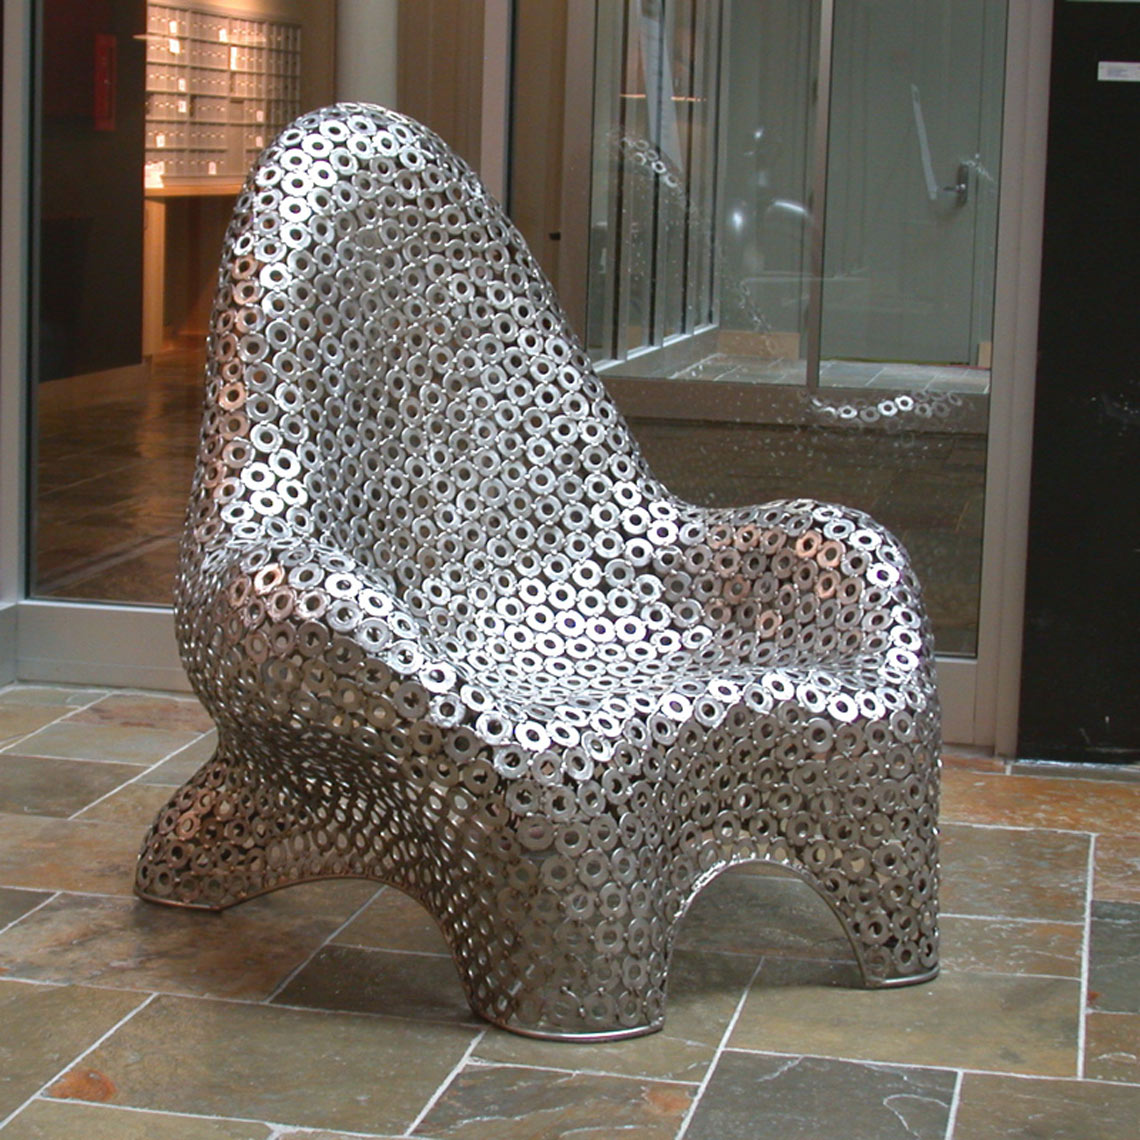 Sculptural public seating in stainless steel by Peter Diepenbrock Providence and Jamestown  RI